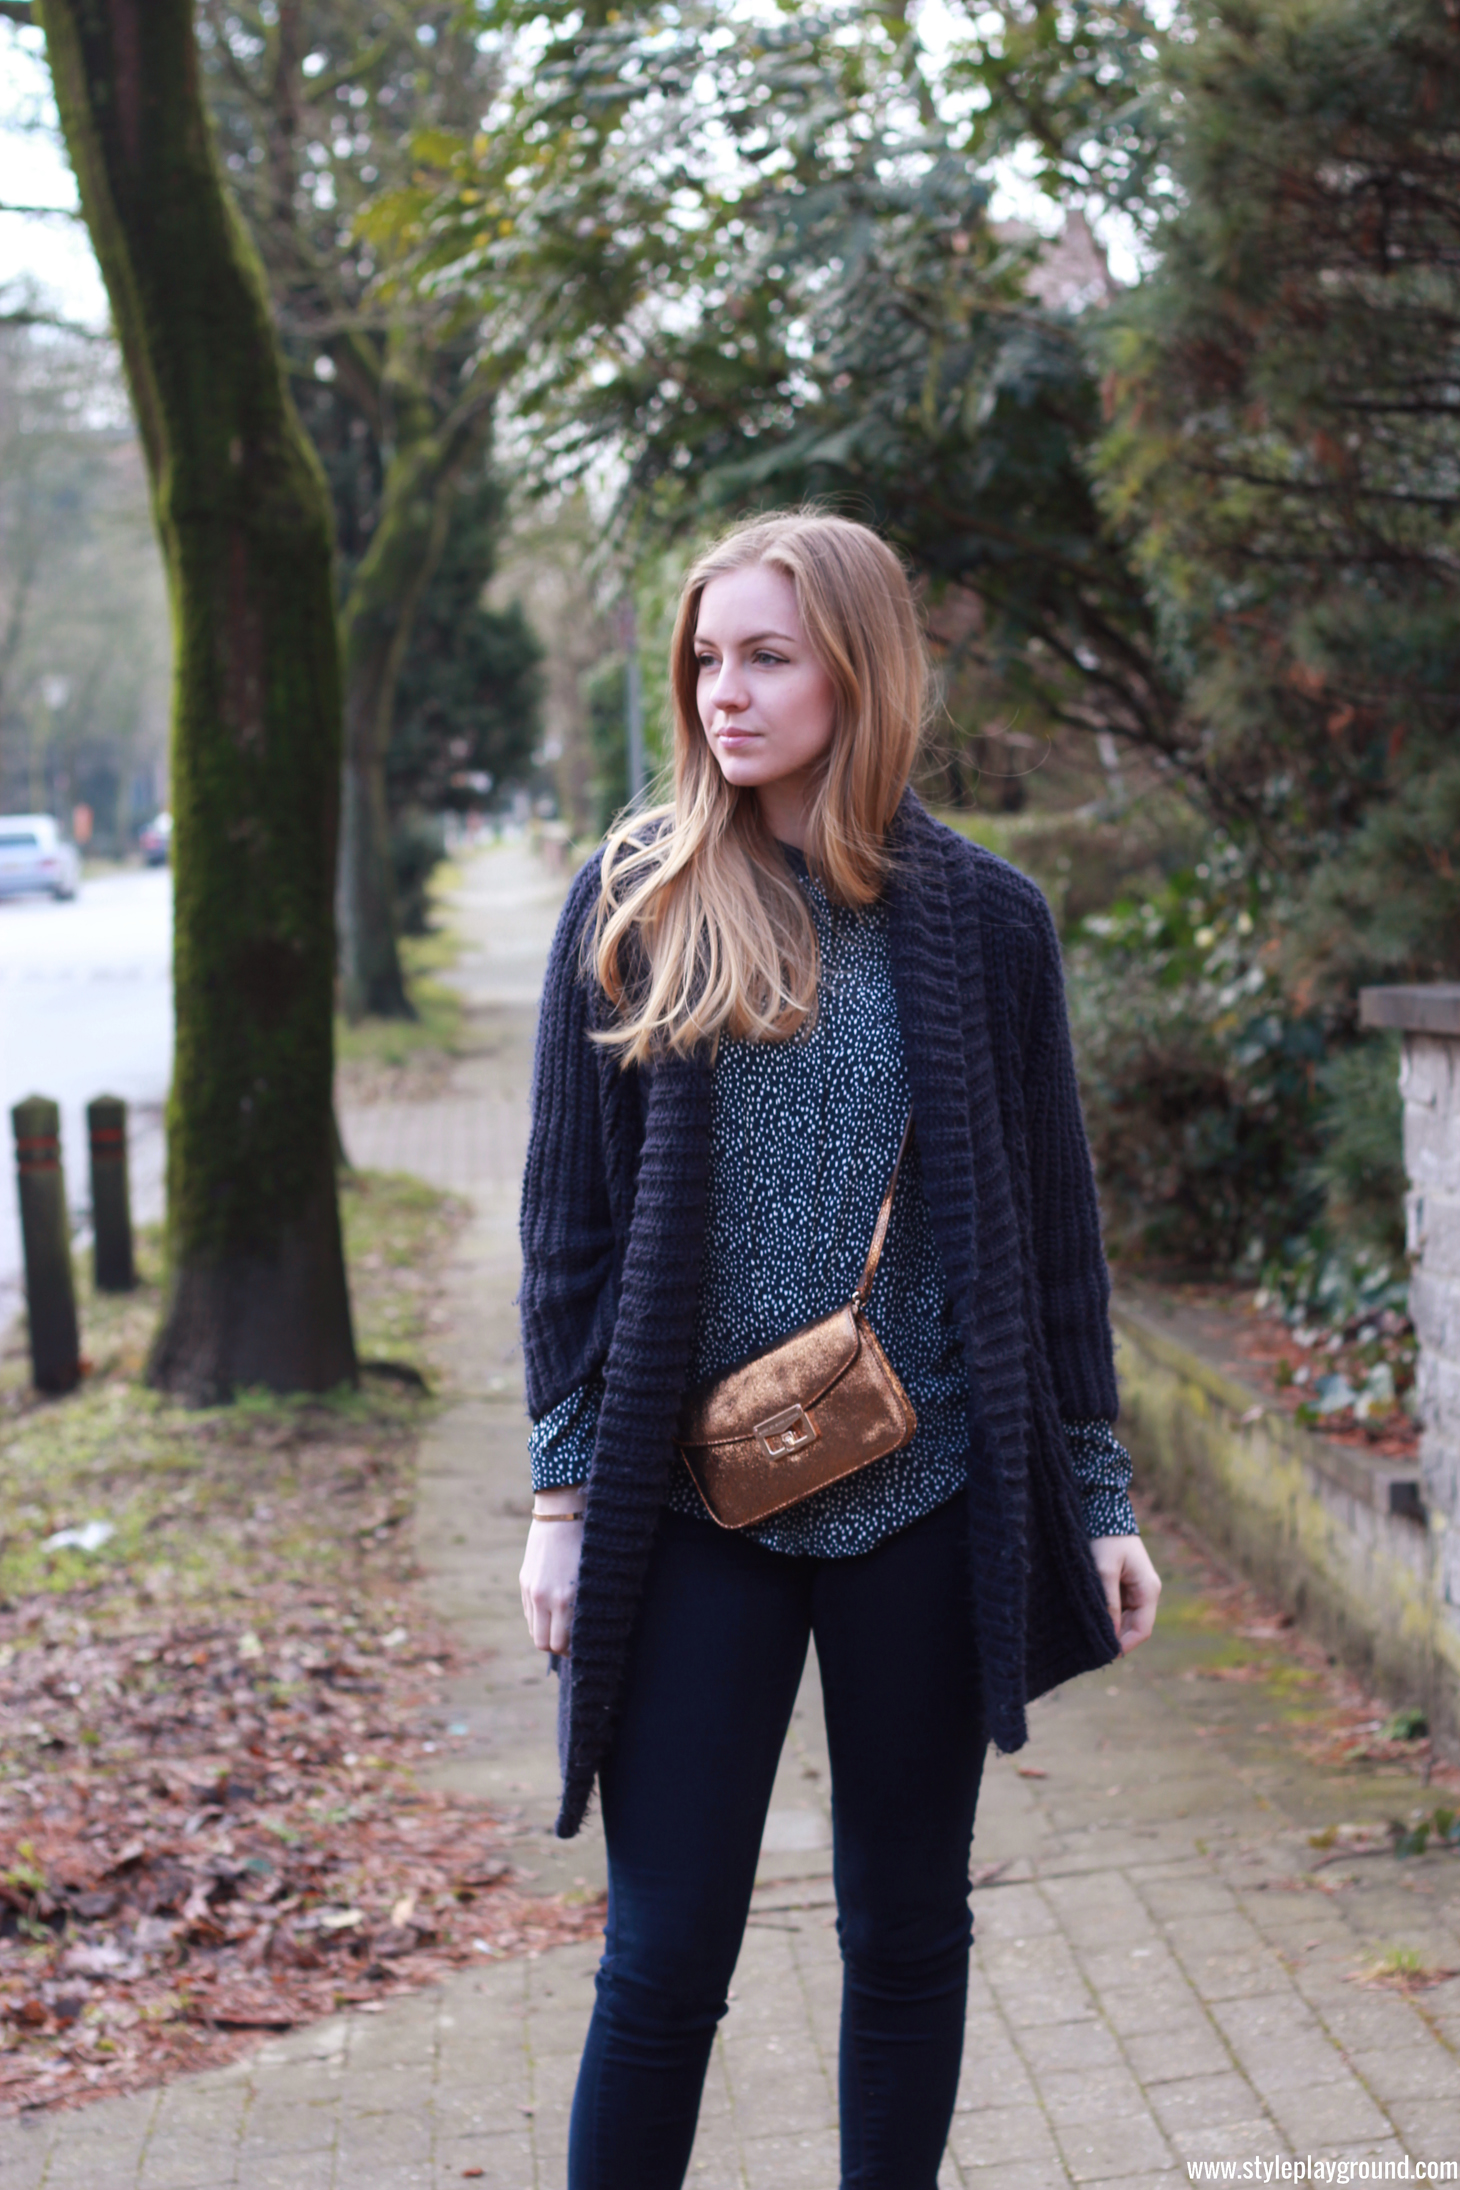 Axelle Blanpain of Style playground is wearing a Mango top, Zara knit, American Eagle jeggings, Acne boots & Marc by Marc Jacobs bag